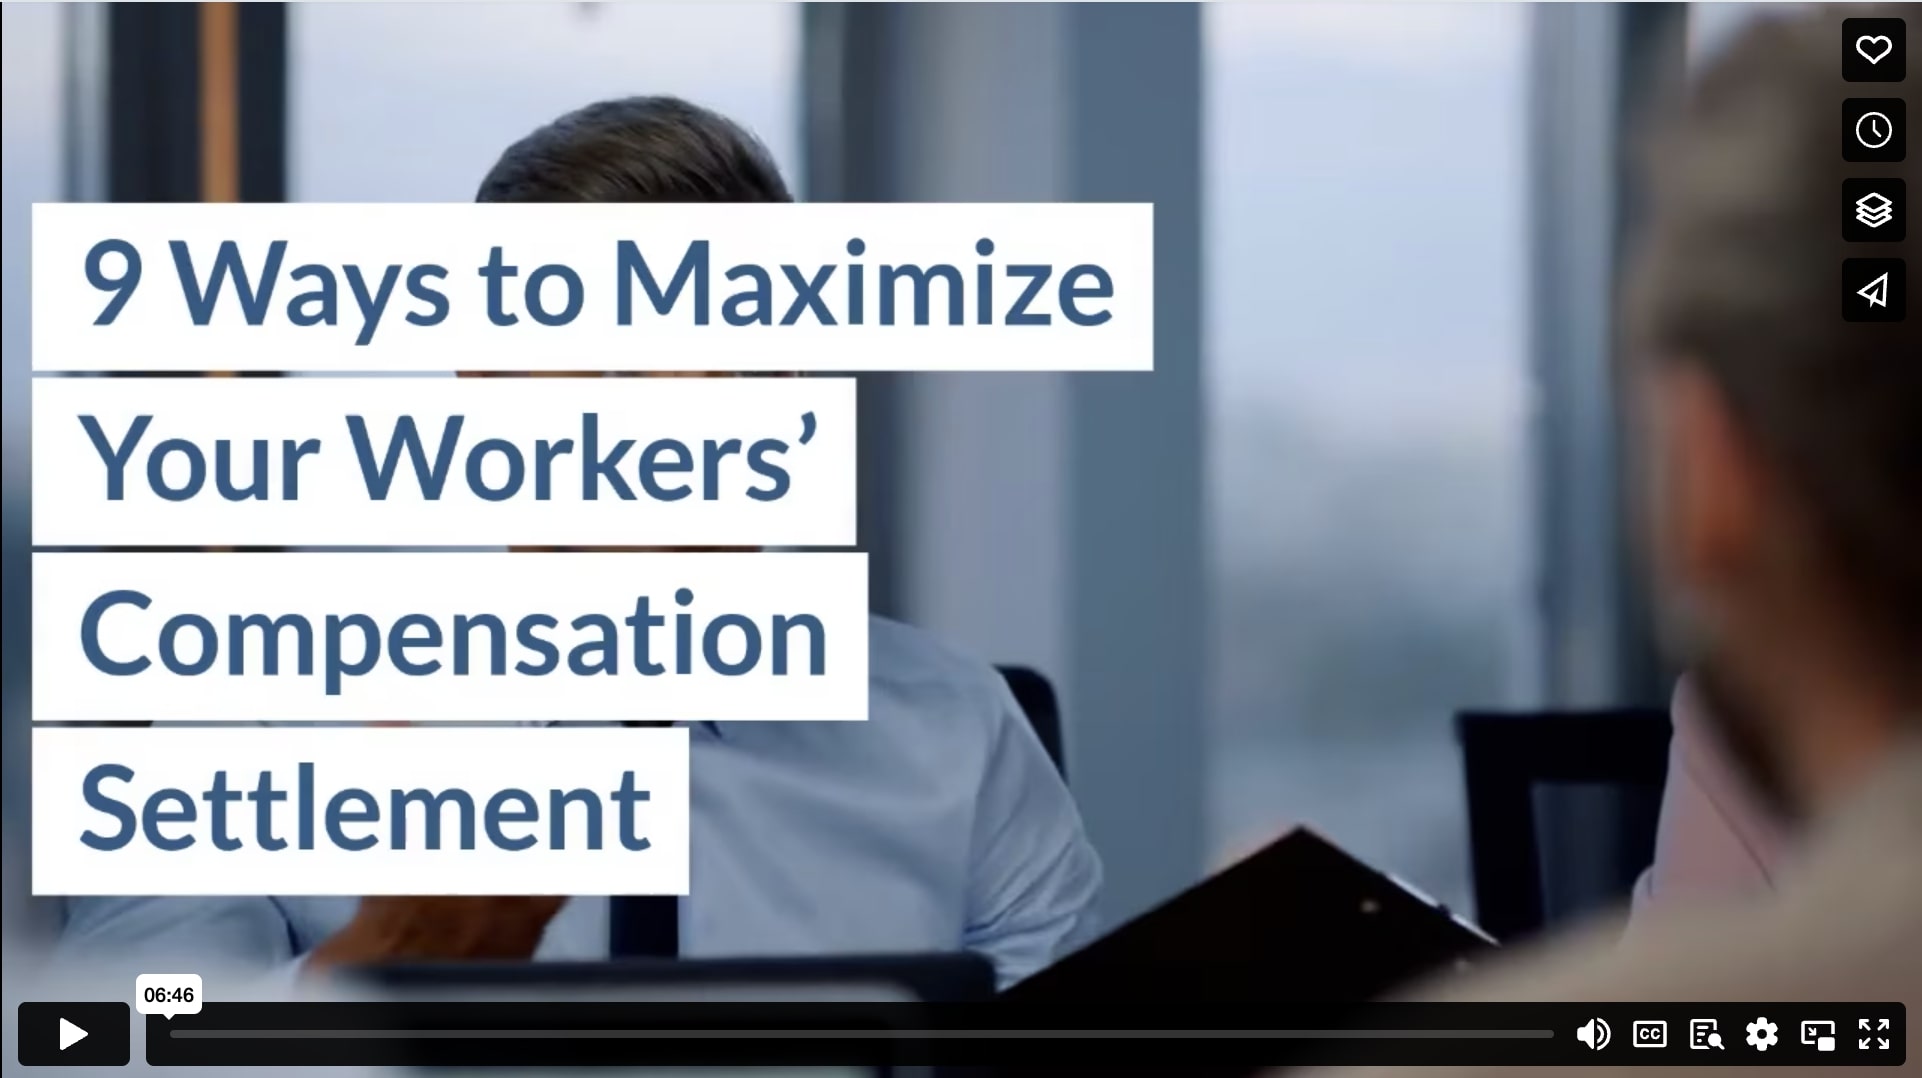 9 Ways to Maximize Your Workers’ Compensation Settlement